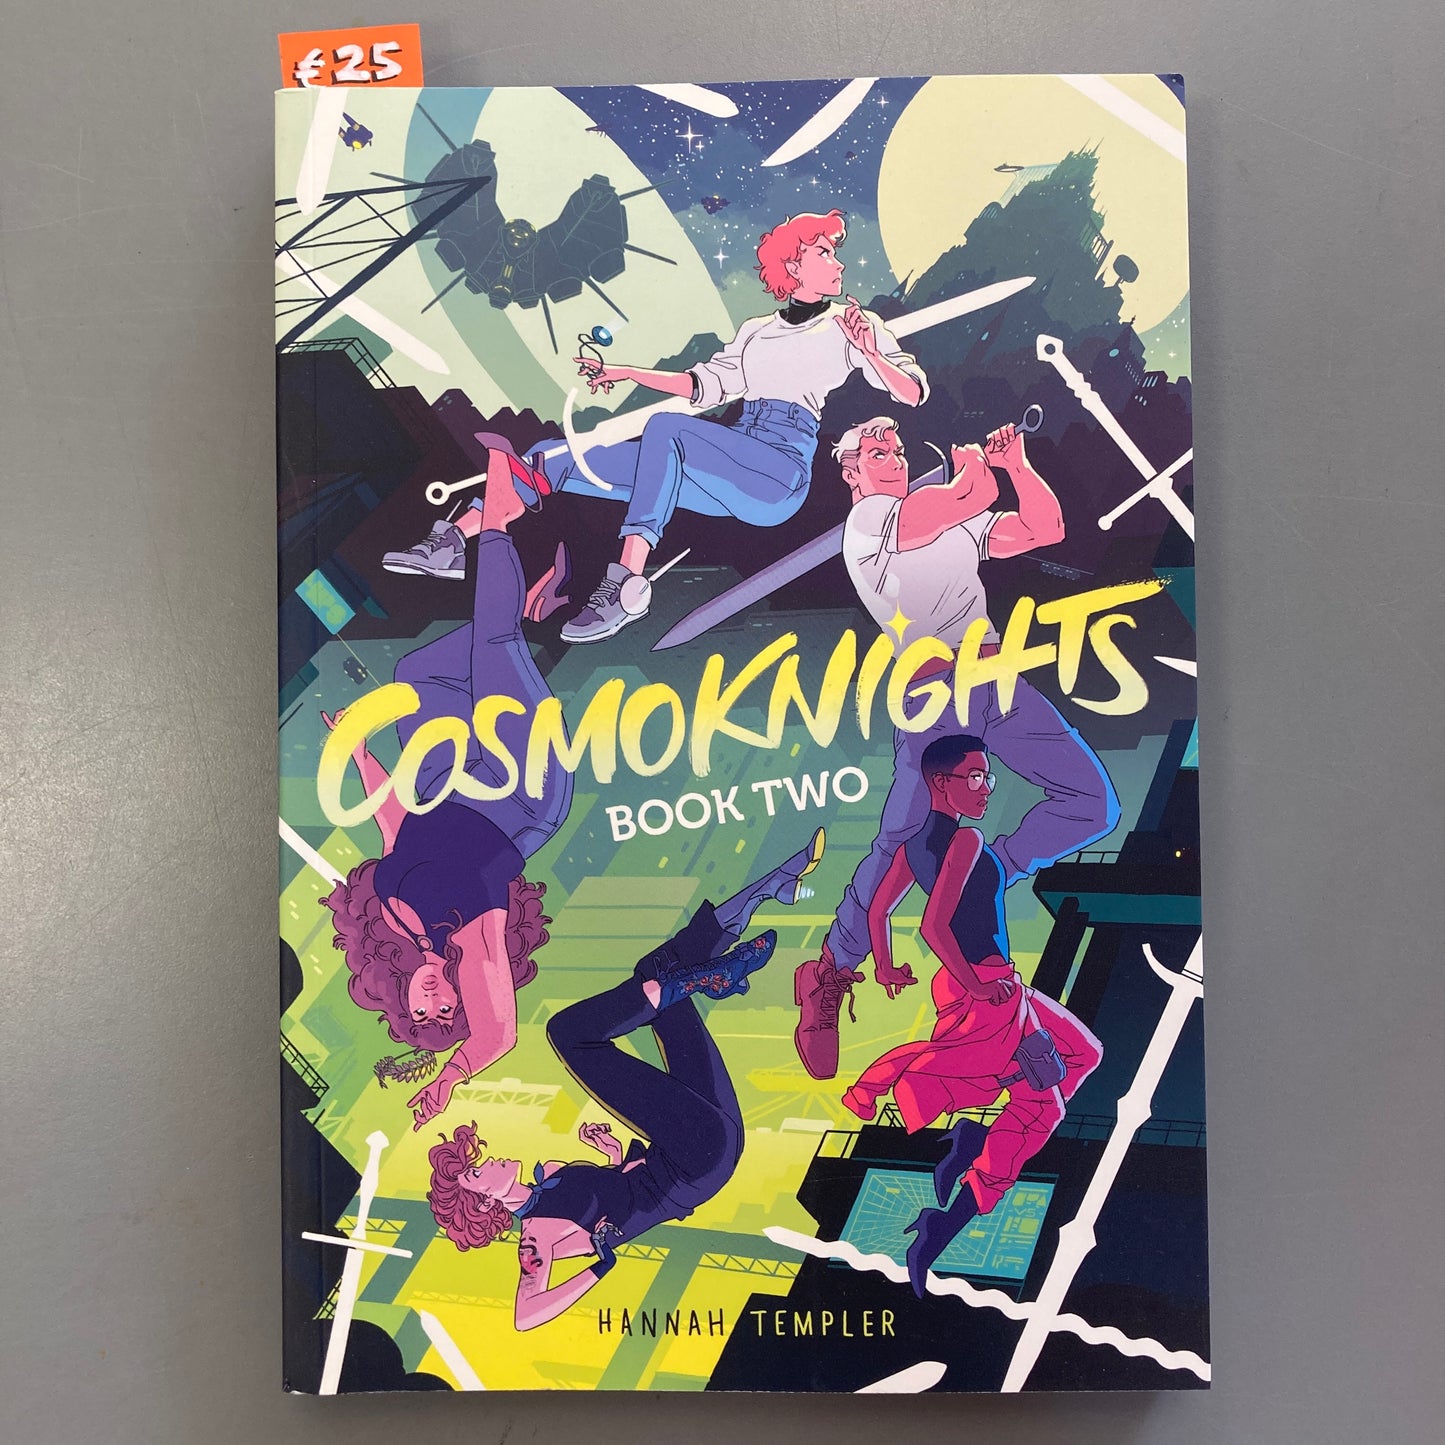 Cosmoknights, Book Two